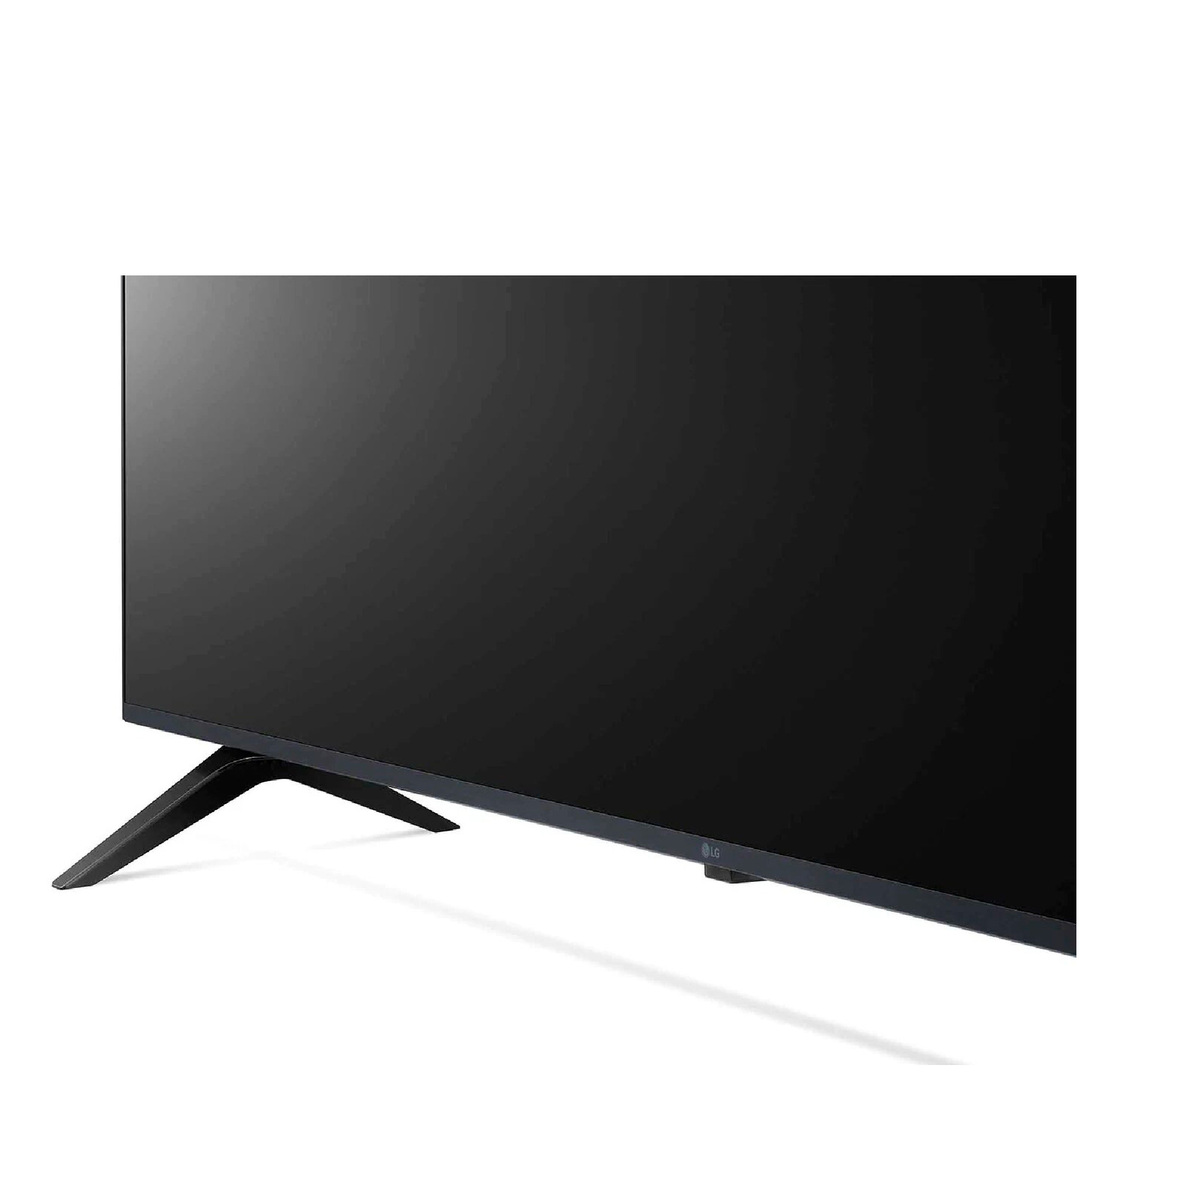 LG UHD 4K TV 75 Inch UP77 Series Cinema Screen Design New 2021 4K Active HDR webOS Smart with ThinQ AI